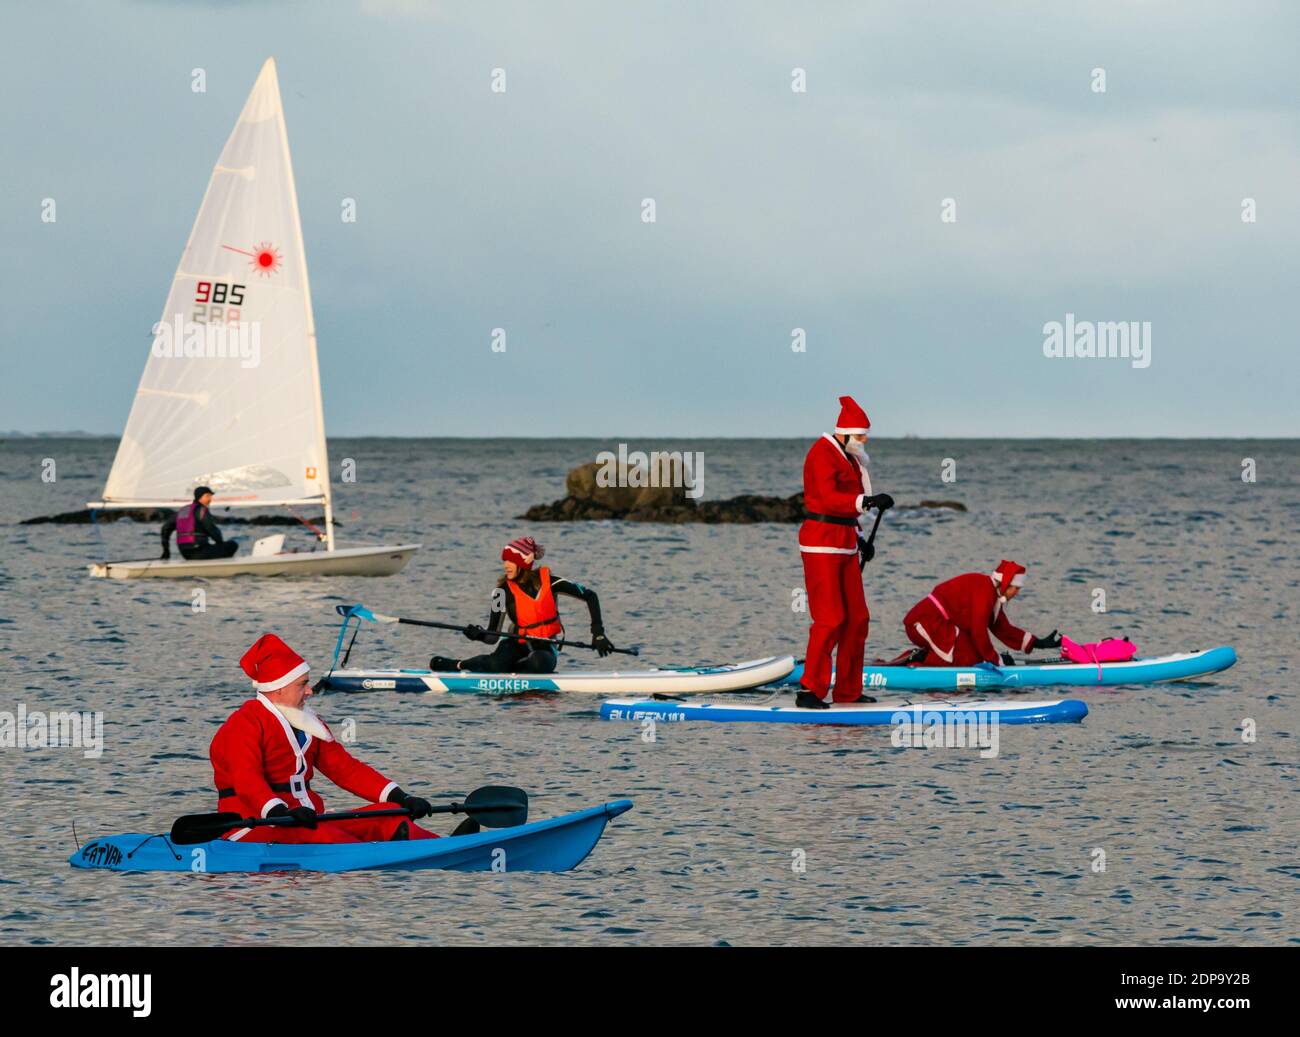 North Berwick, East Lothian, Scotland, United Kingdom, 19th December 2020. Paddle Boarding Santas for charity: a local community initiative by North Berwick News and Views called 'Christmas Cheer' raises over £5,000 funds for families in need. The paddle boarders are dressed in Santa costumes with a sailing boat passing by Stock Photo